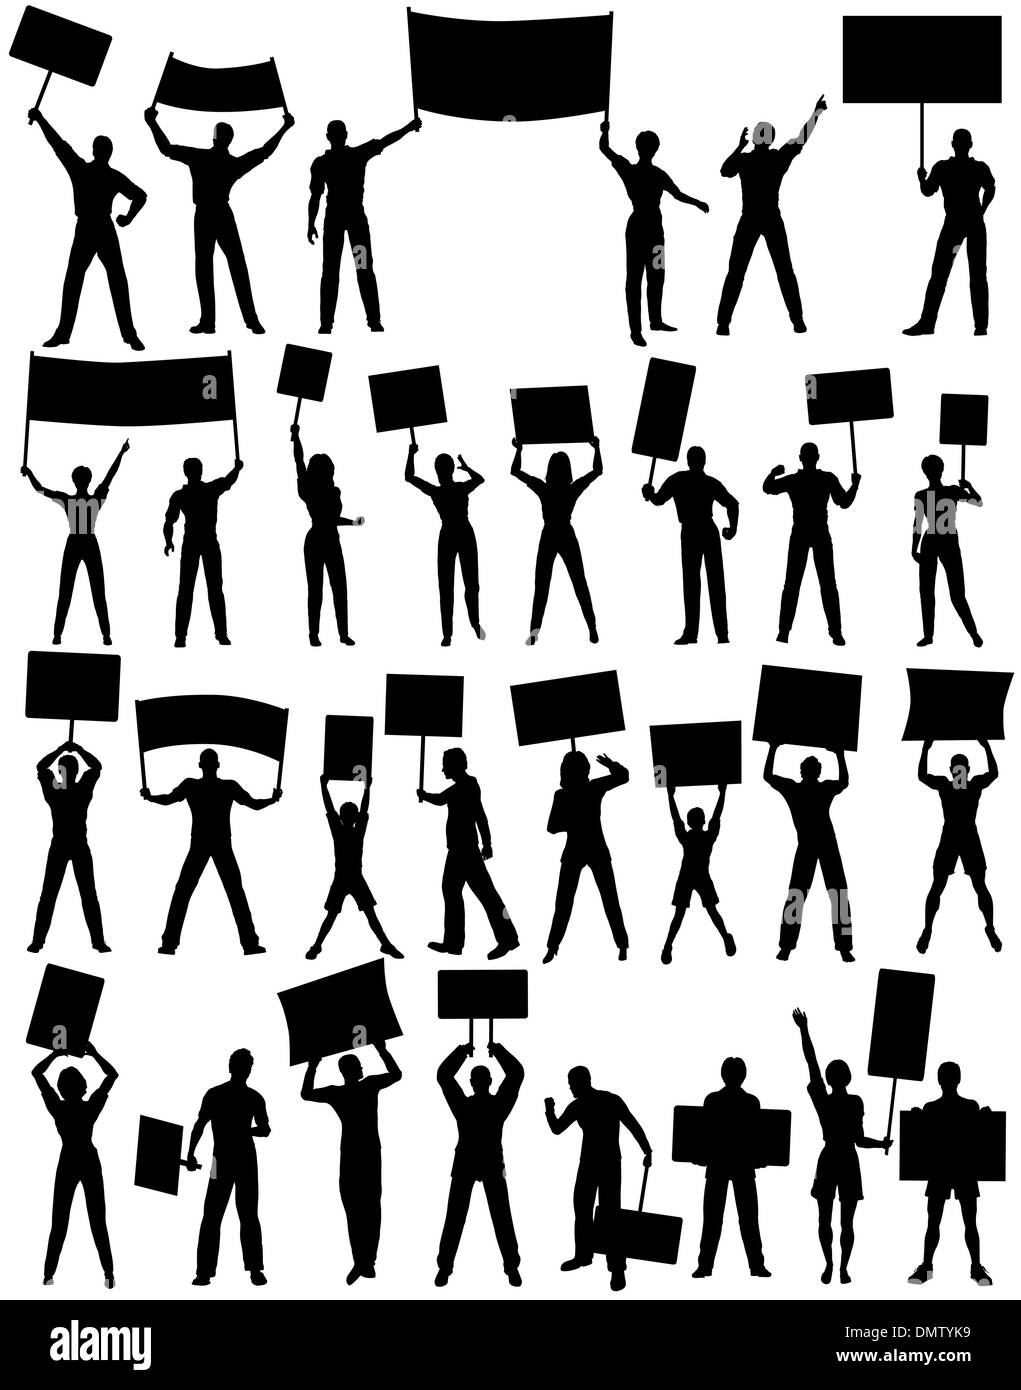 Protesters Stock Vector